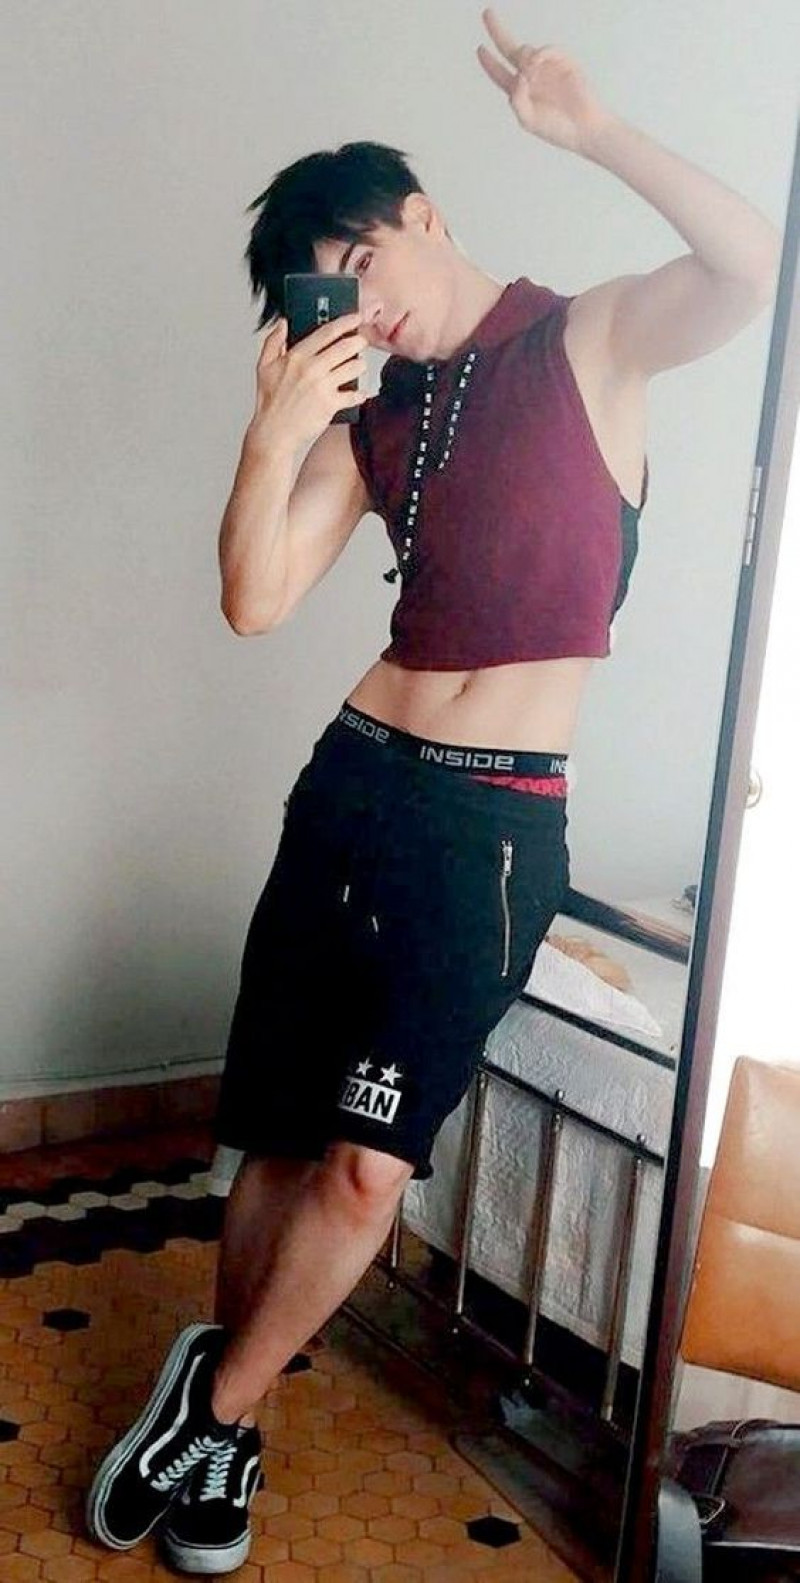 Purple And Violet Sleeveless Crop Top, Black Cotton Denim Short, Femboy Outfits